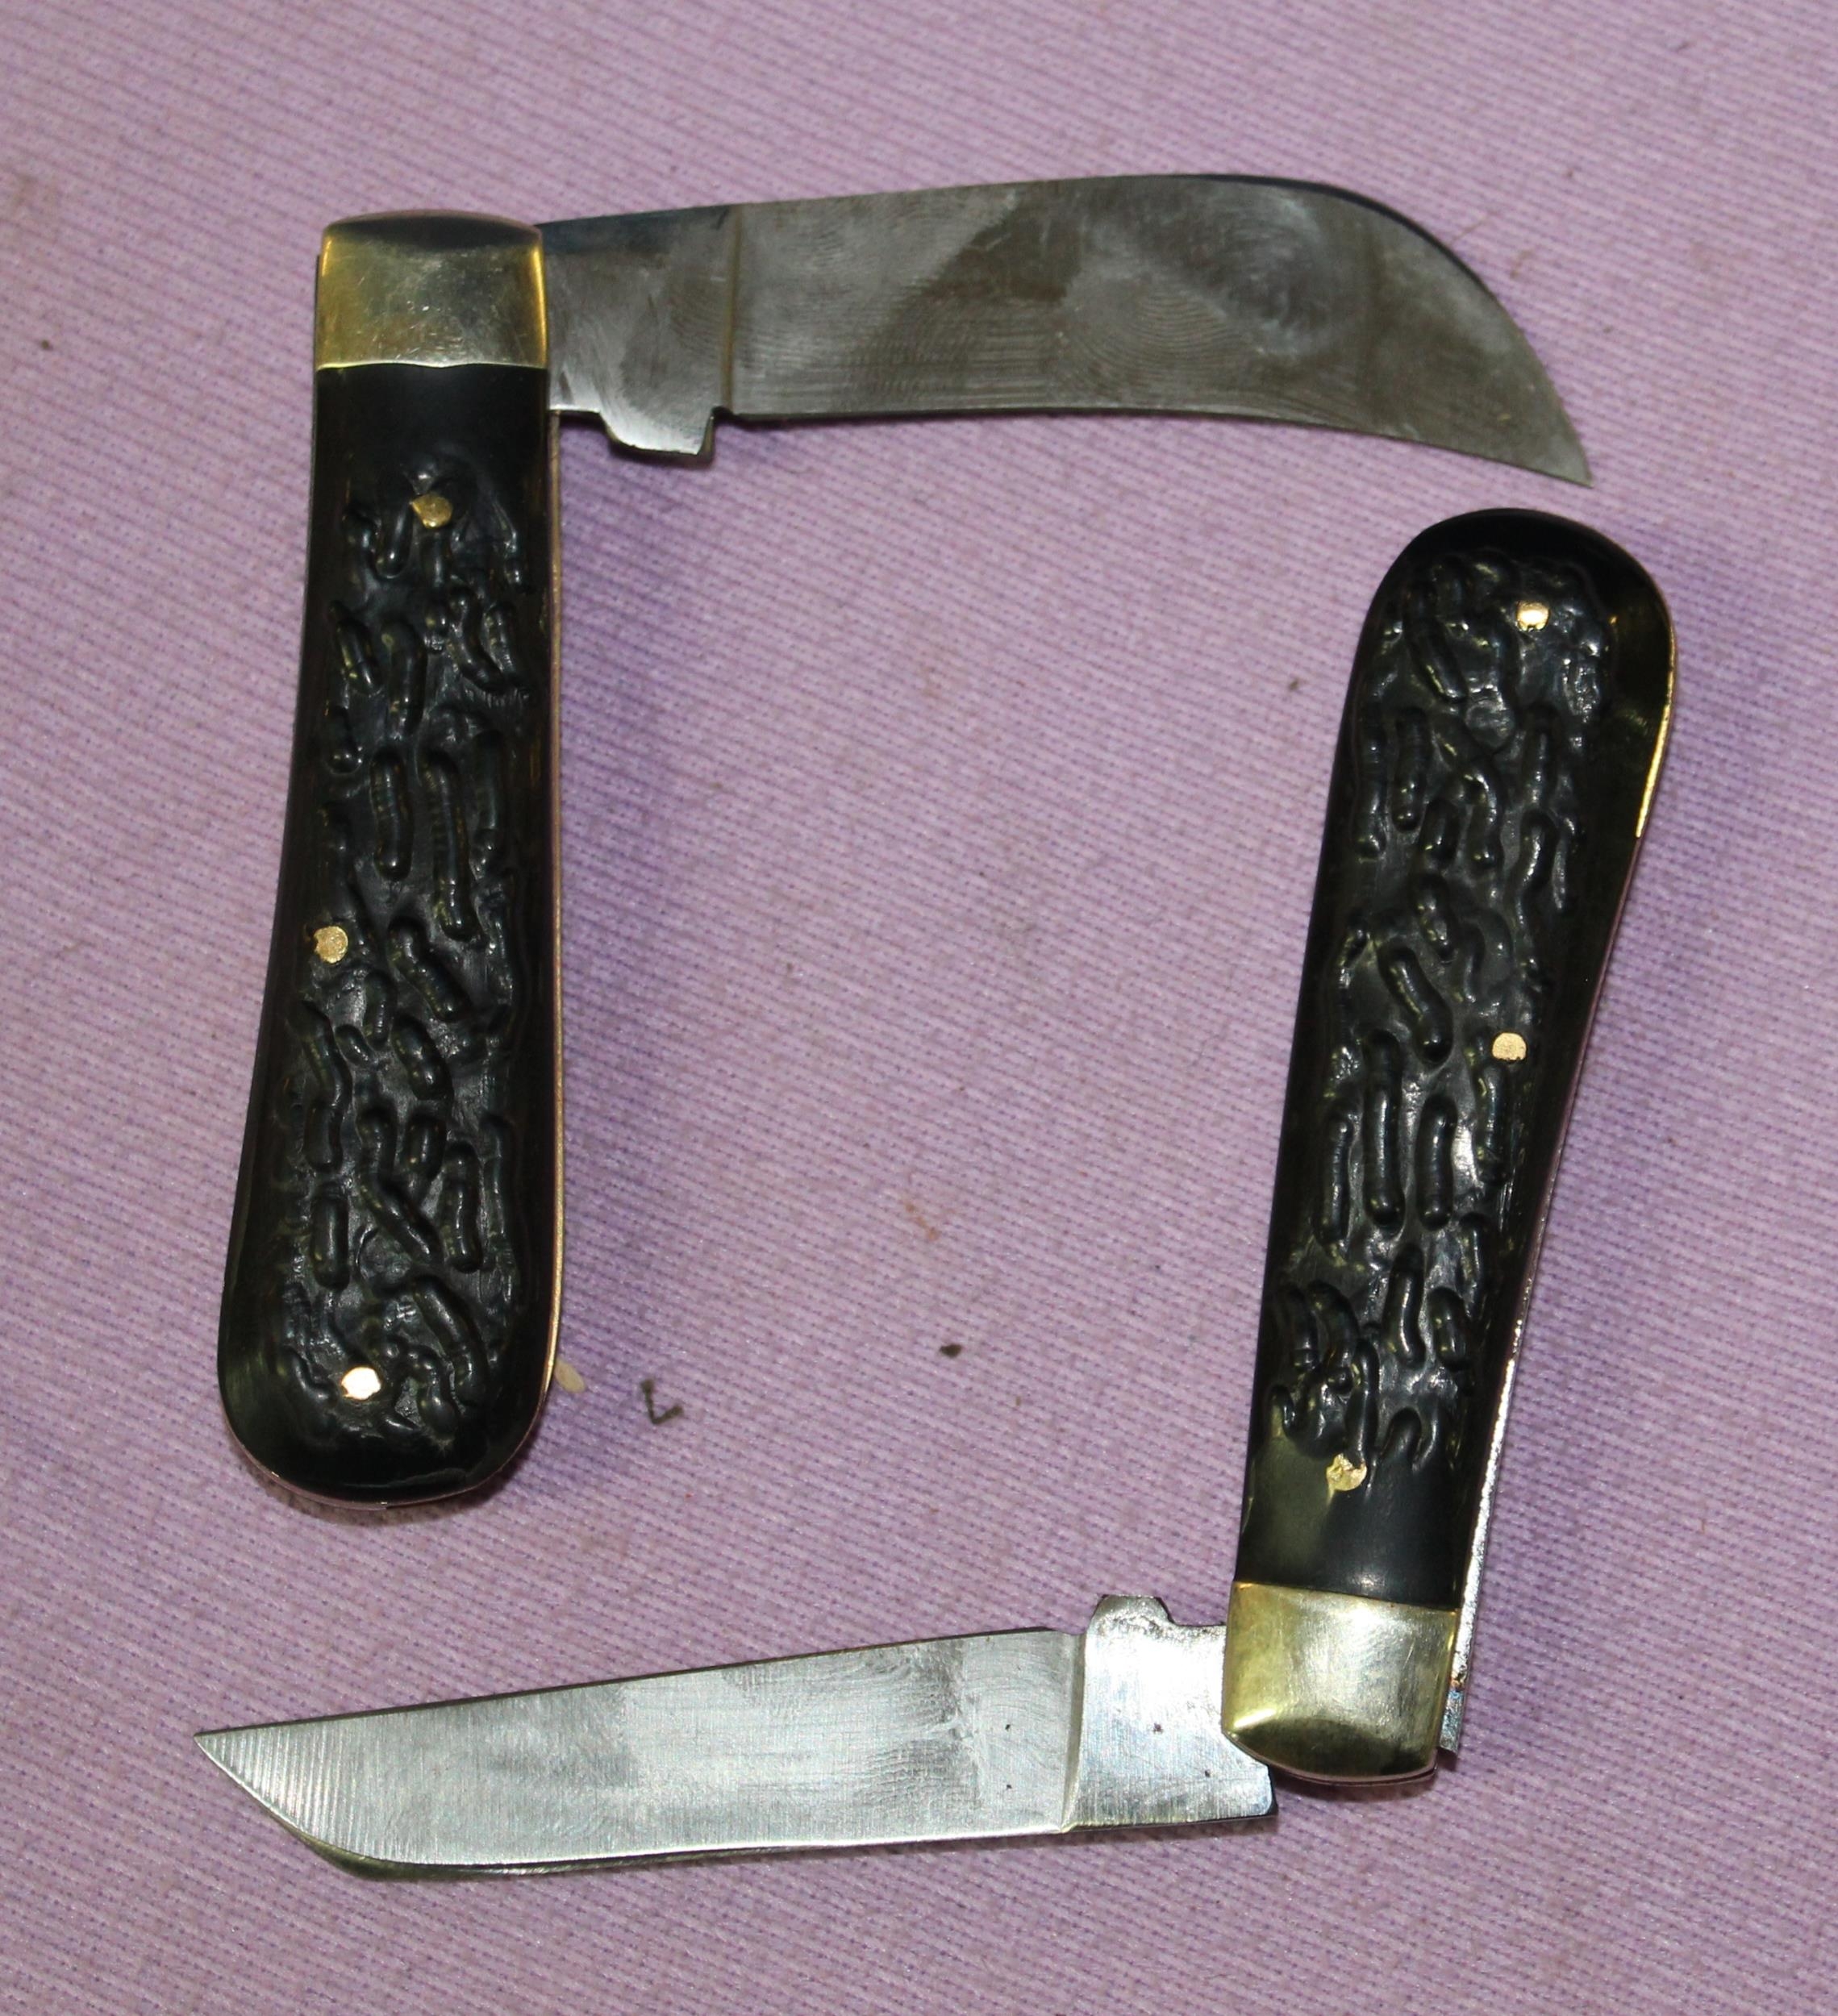 A pair of Lambsfoot pocket knives by A Wright & Son with 7 cm blades, overall length 16cm.